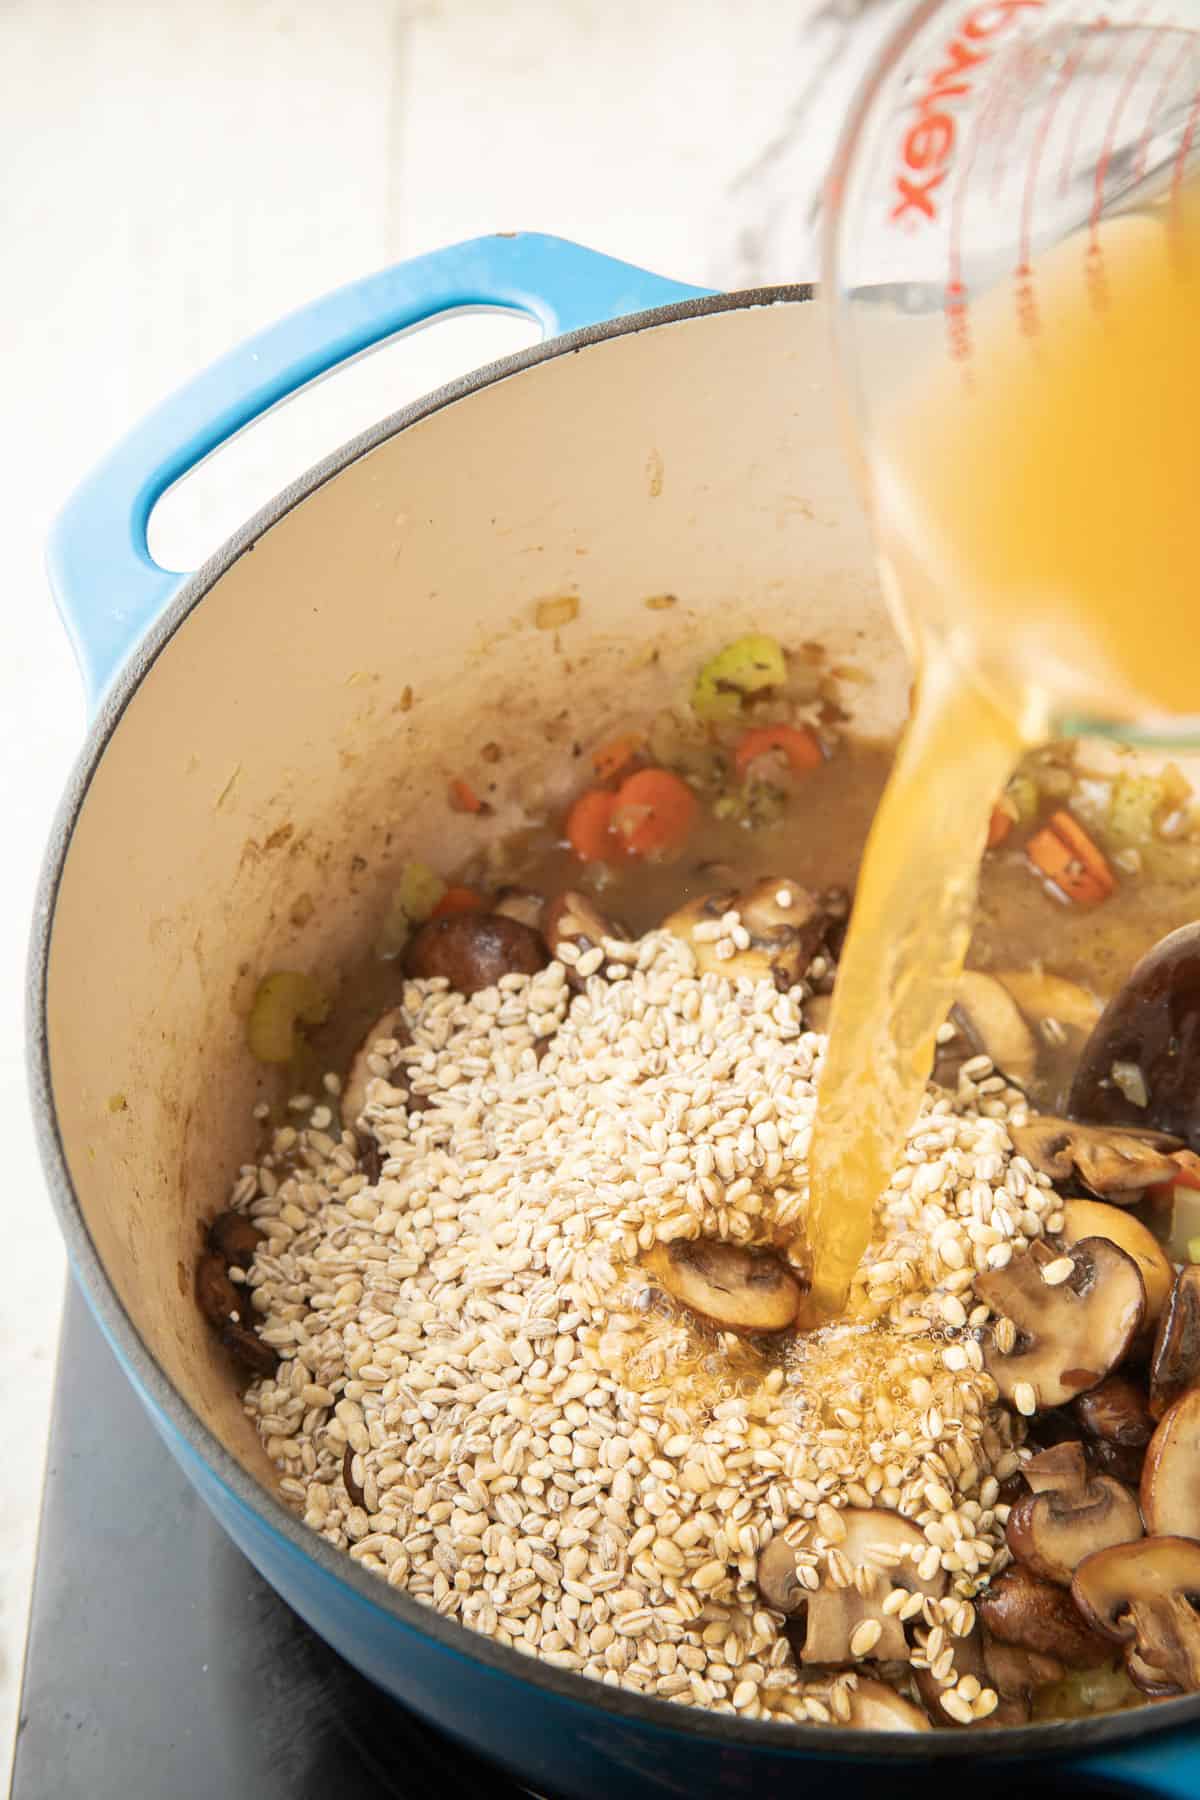 The broth is being poured into a pot filled with vegetables, mushrooms and pearl barley.